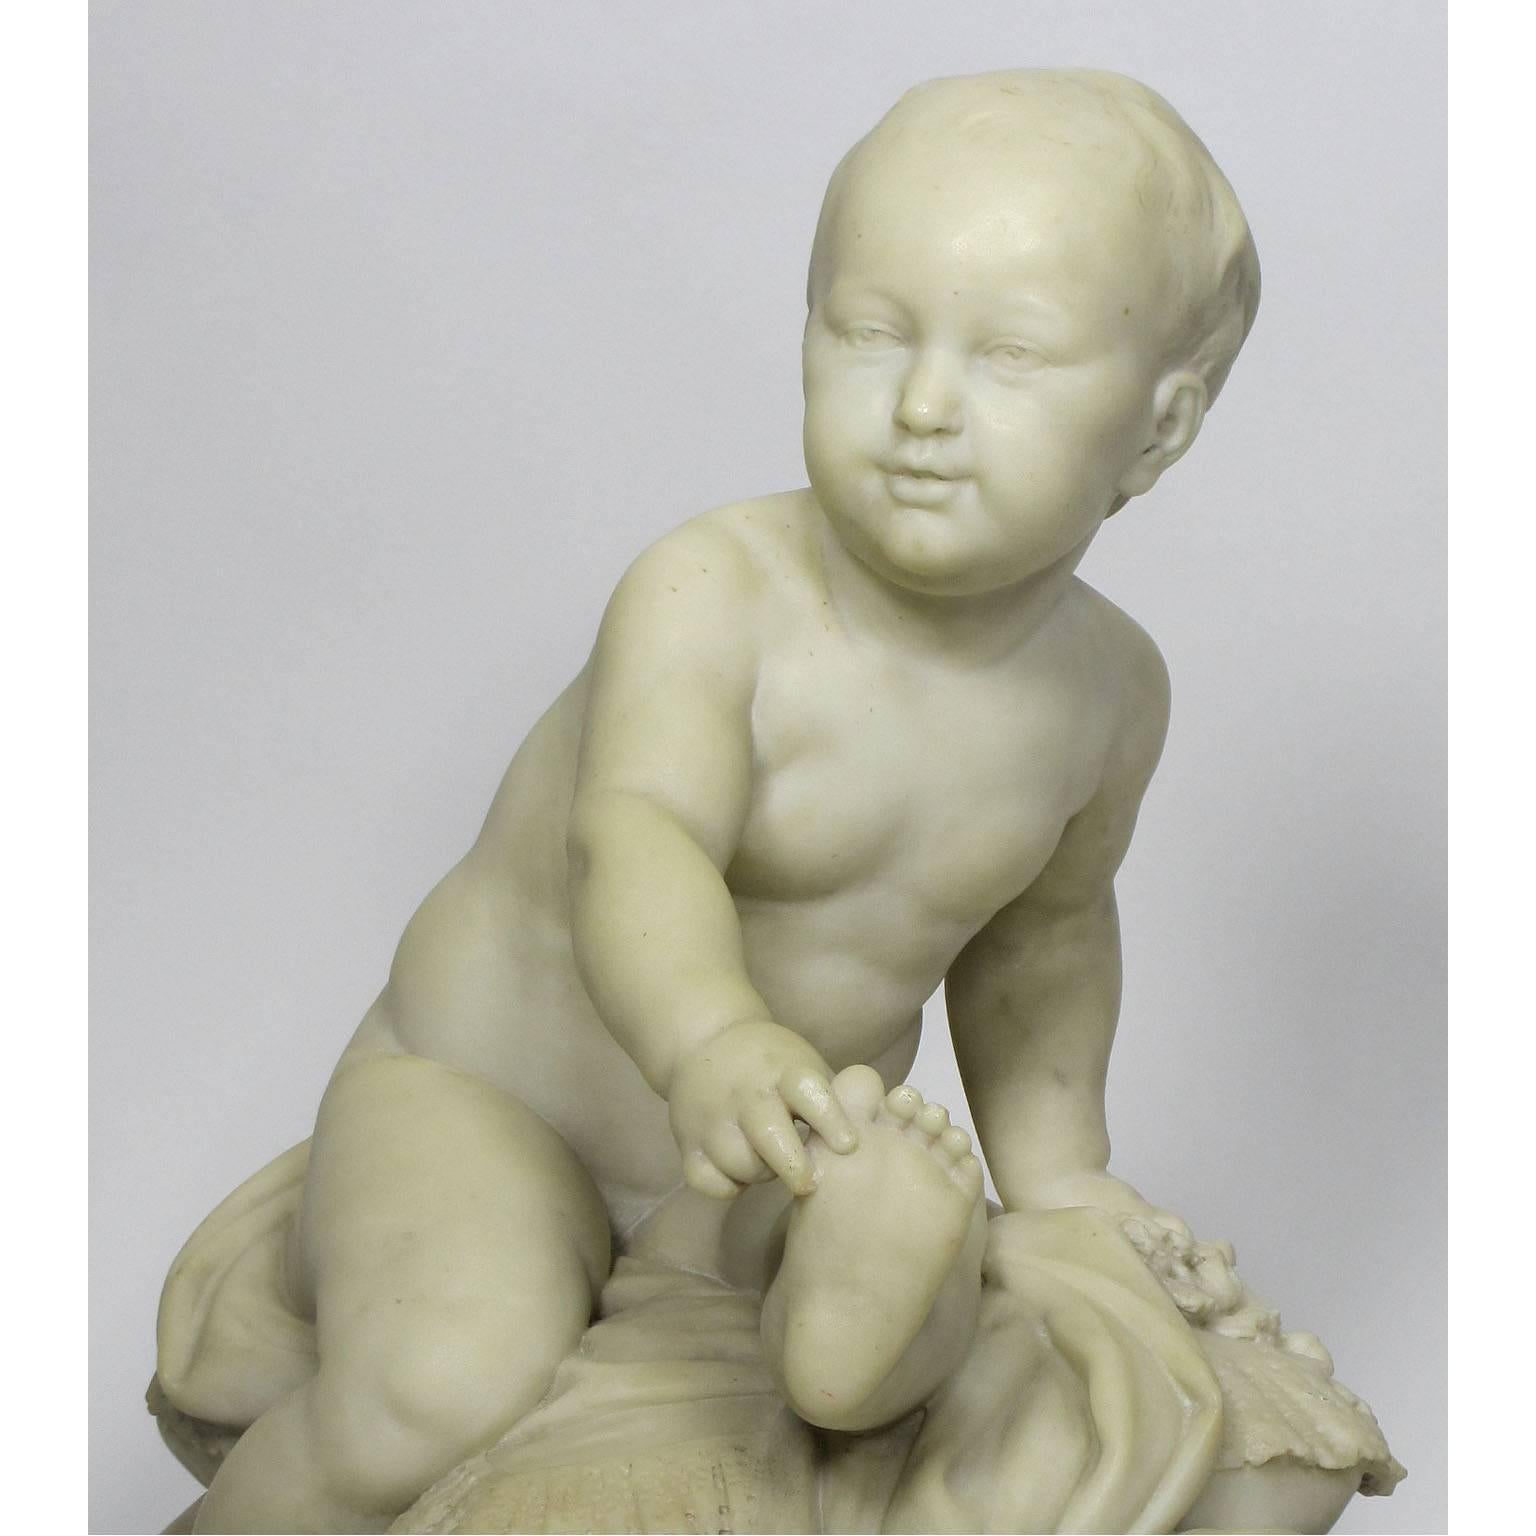 A very fine and charming French 19th century carved white marble sculpture of a young prince seated on a pillow with tassels. In the manner of Jean-Baptiste Pigalle (French, 1714-1785.) circa Paris, 1880.

Measures: Heigth: 19 3/4 inches (50.2